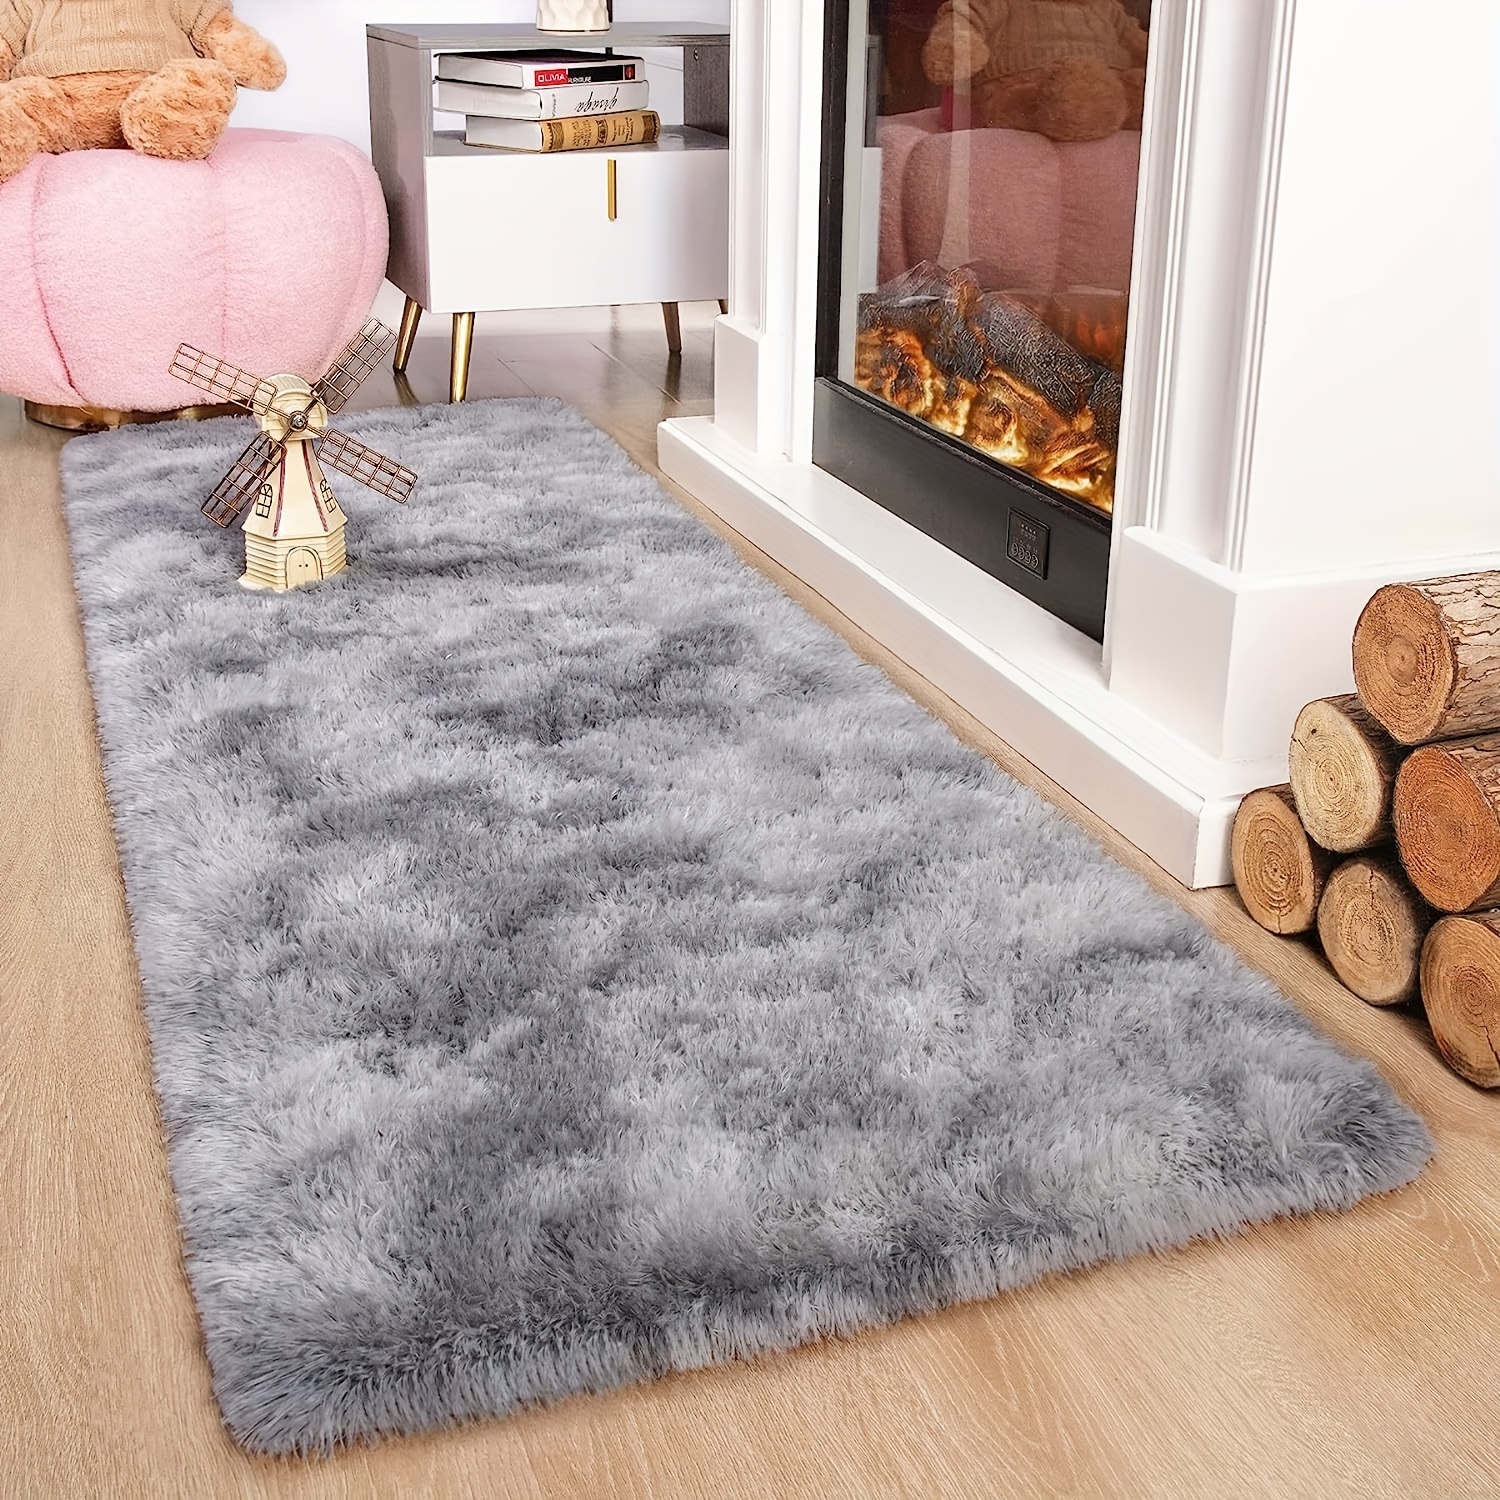 Ultra Soft Plush Rug 4'x5.3', Tie-dyed Large Area Rug, Non-slip Fluffy  Shaggy Rug, Waterproof Shaggy Throw Rugs For Living Room Bedroom Nursery  Room, Game Room Dormitory Carpet, Teenage Room Decoration, Room Decor 